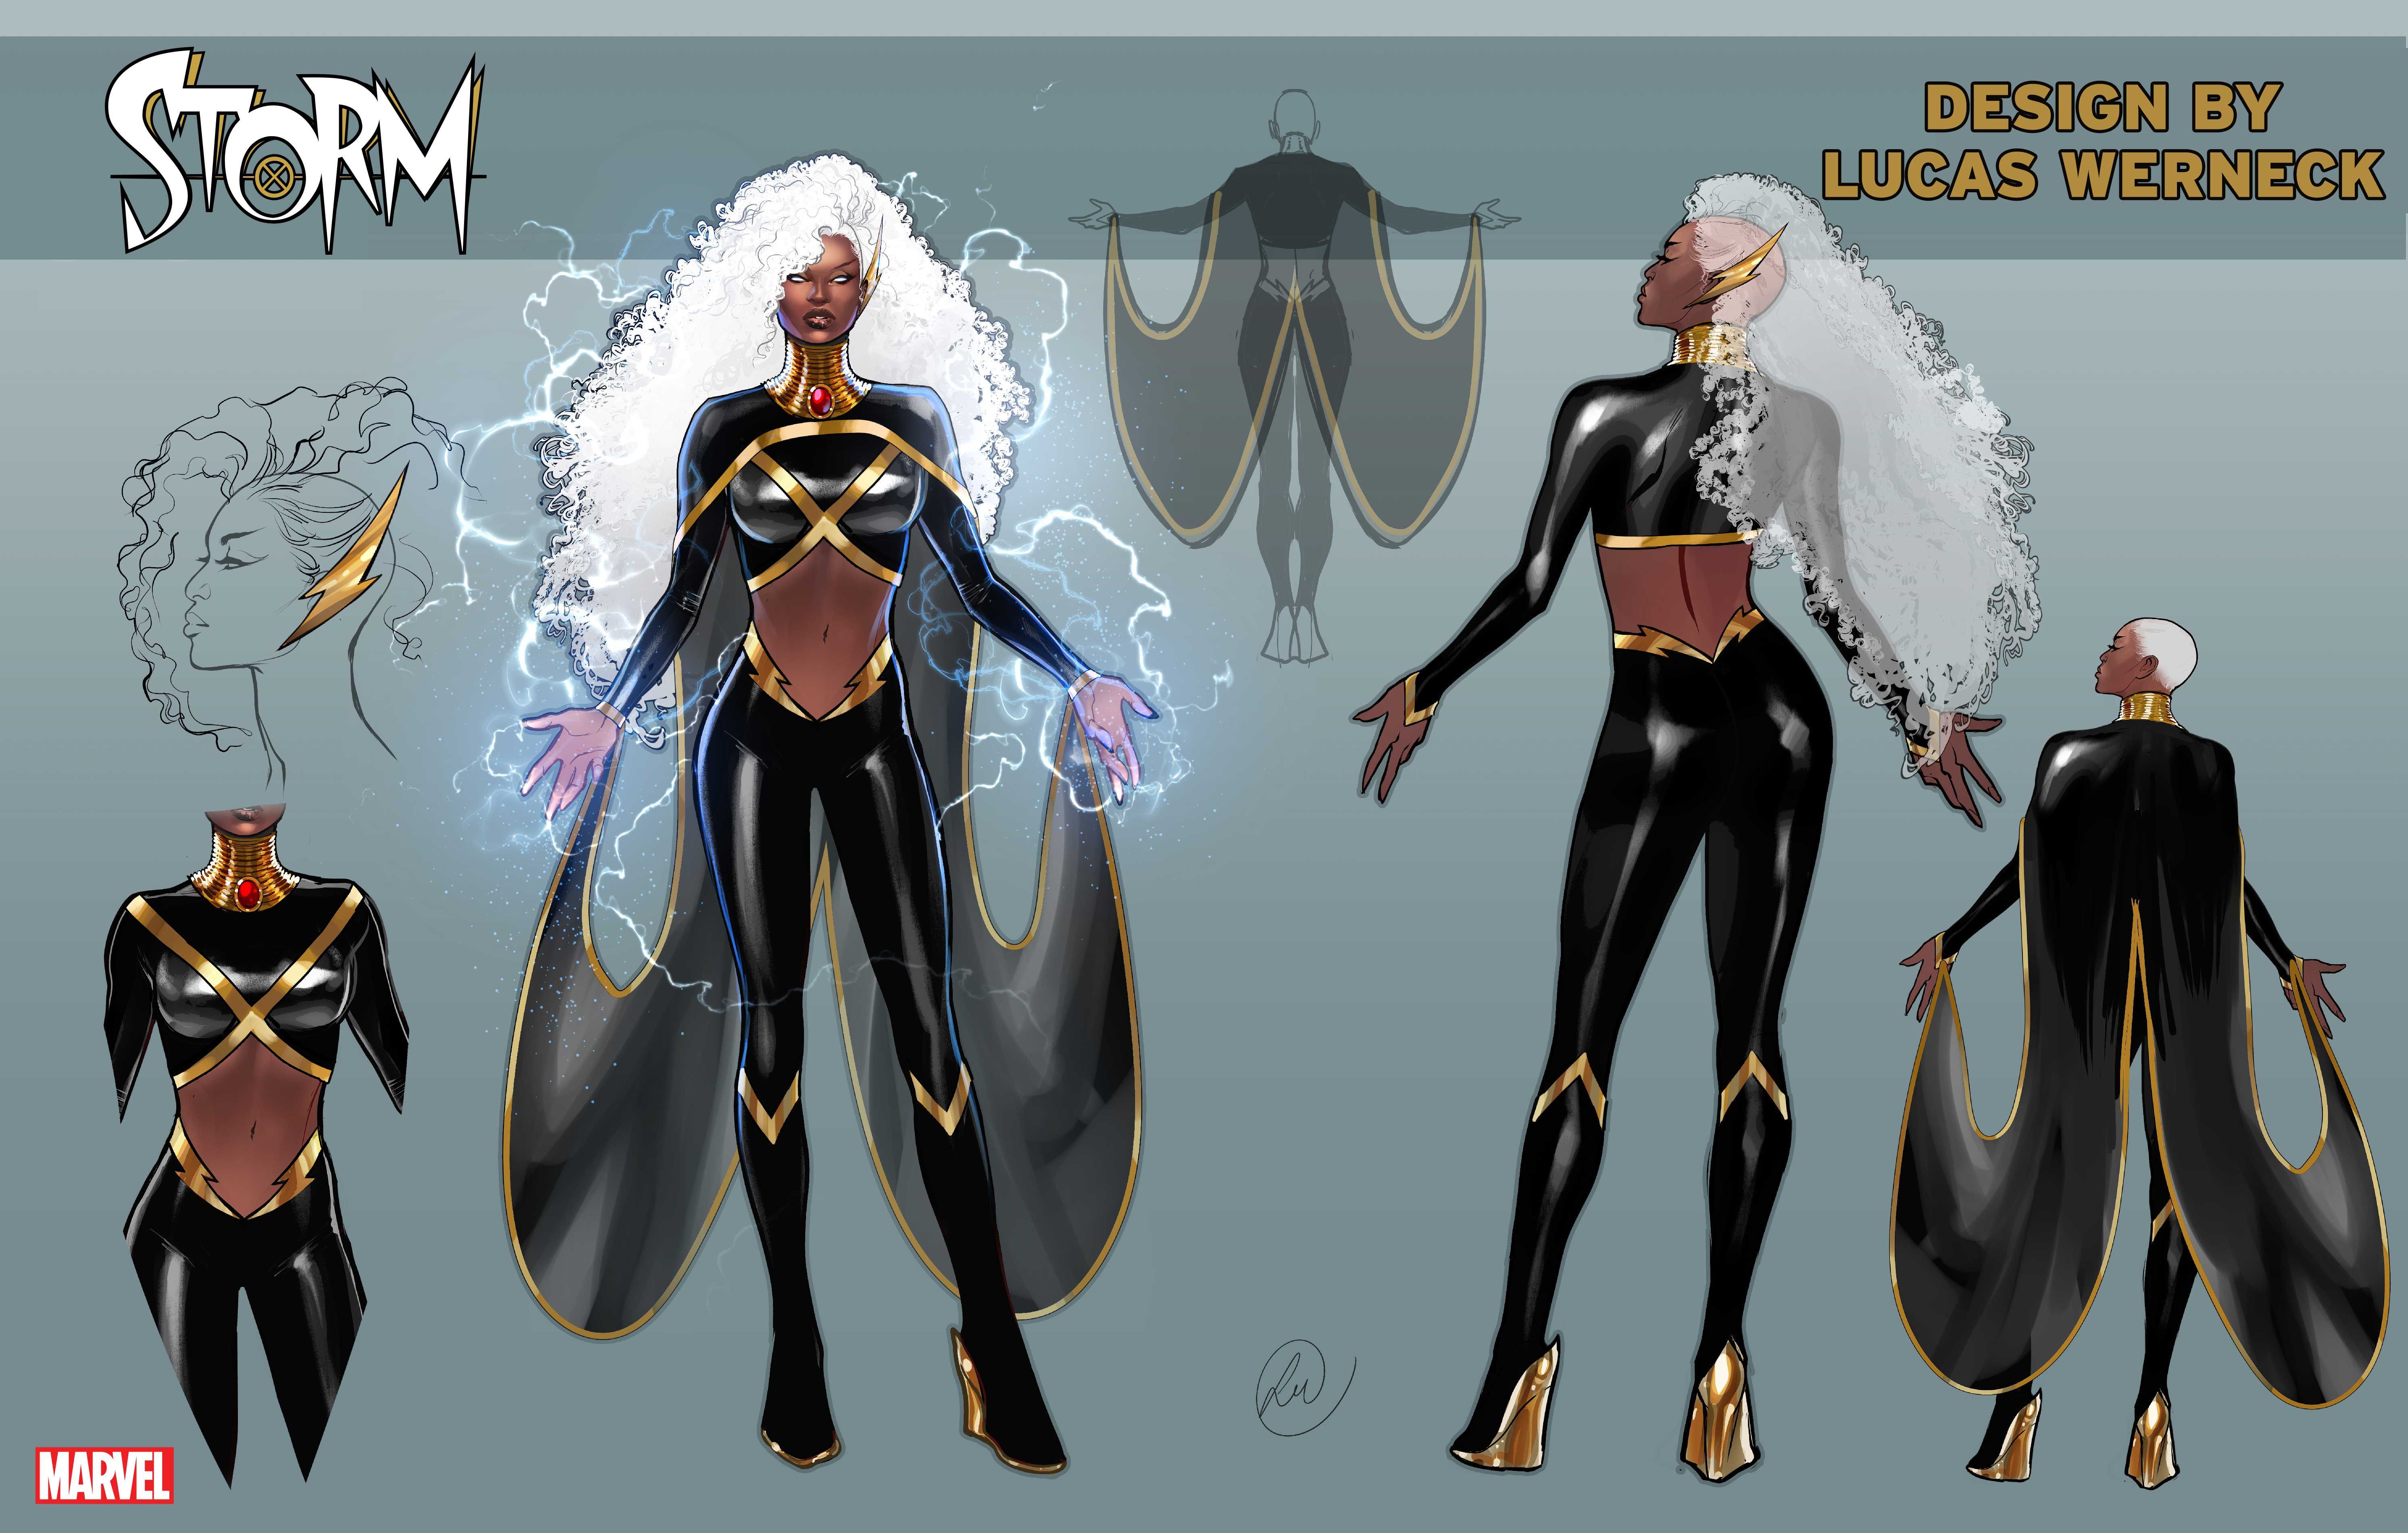 Designs for Storm's new costume